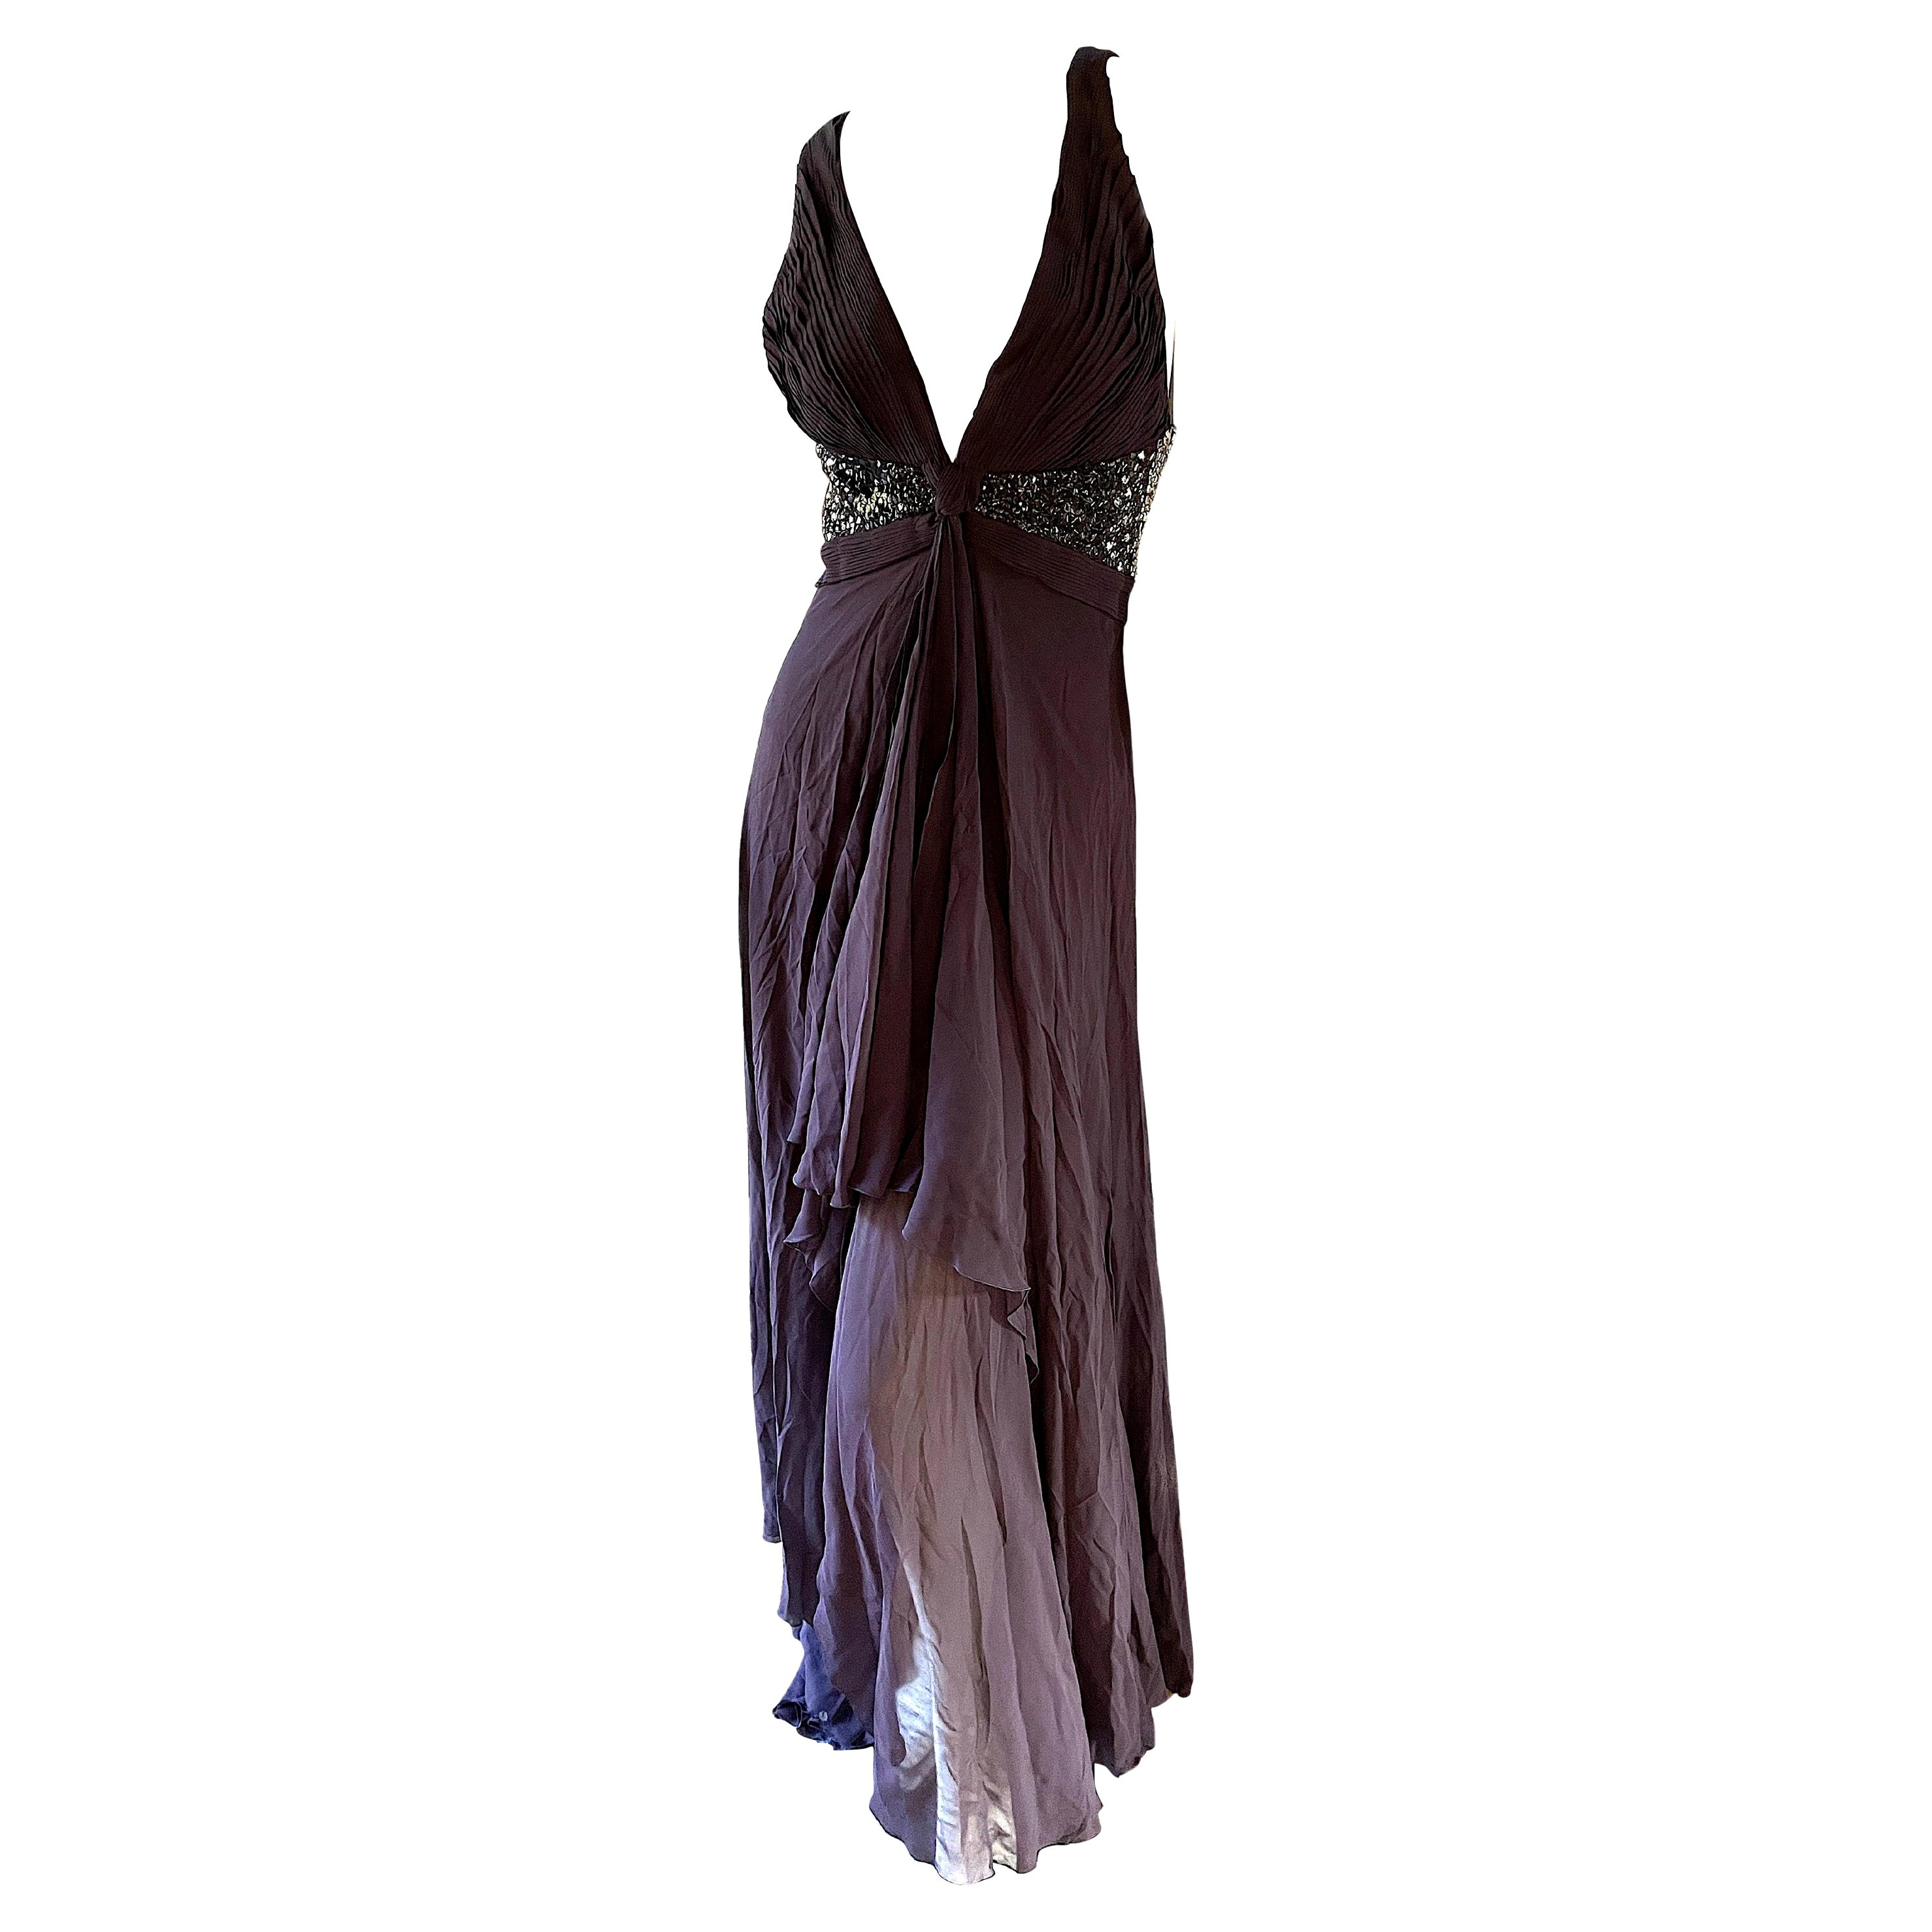 Roberto Cavalli Vintage Ombre Sequin Purple Plunging Dress with Sexy Back